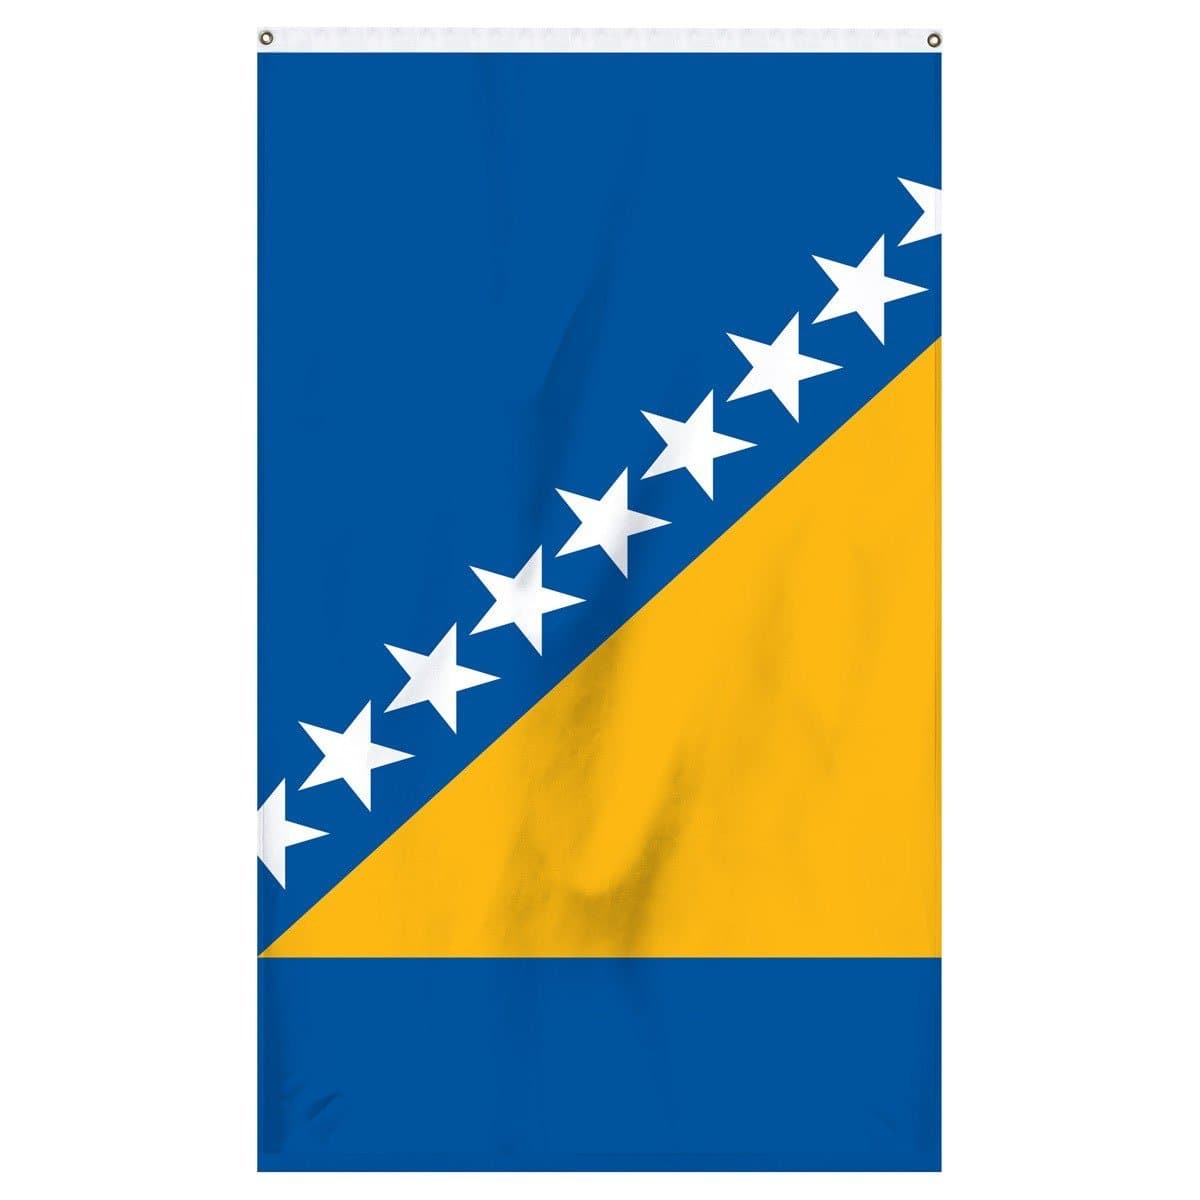 The national flag of Bosnia for sale